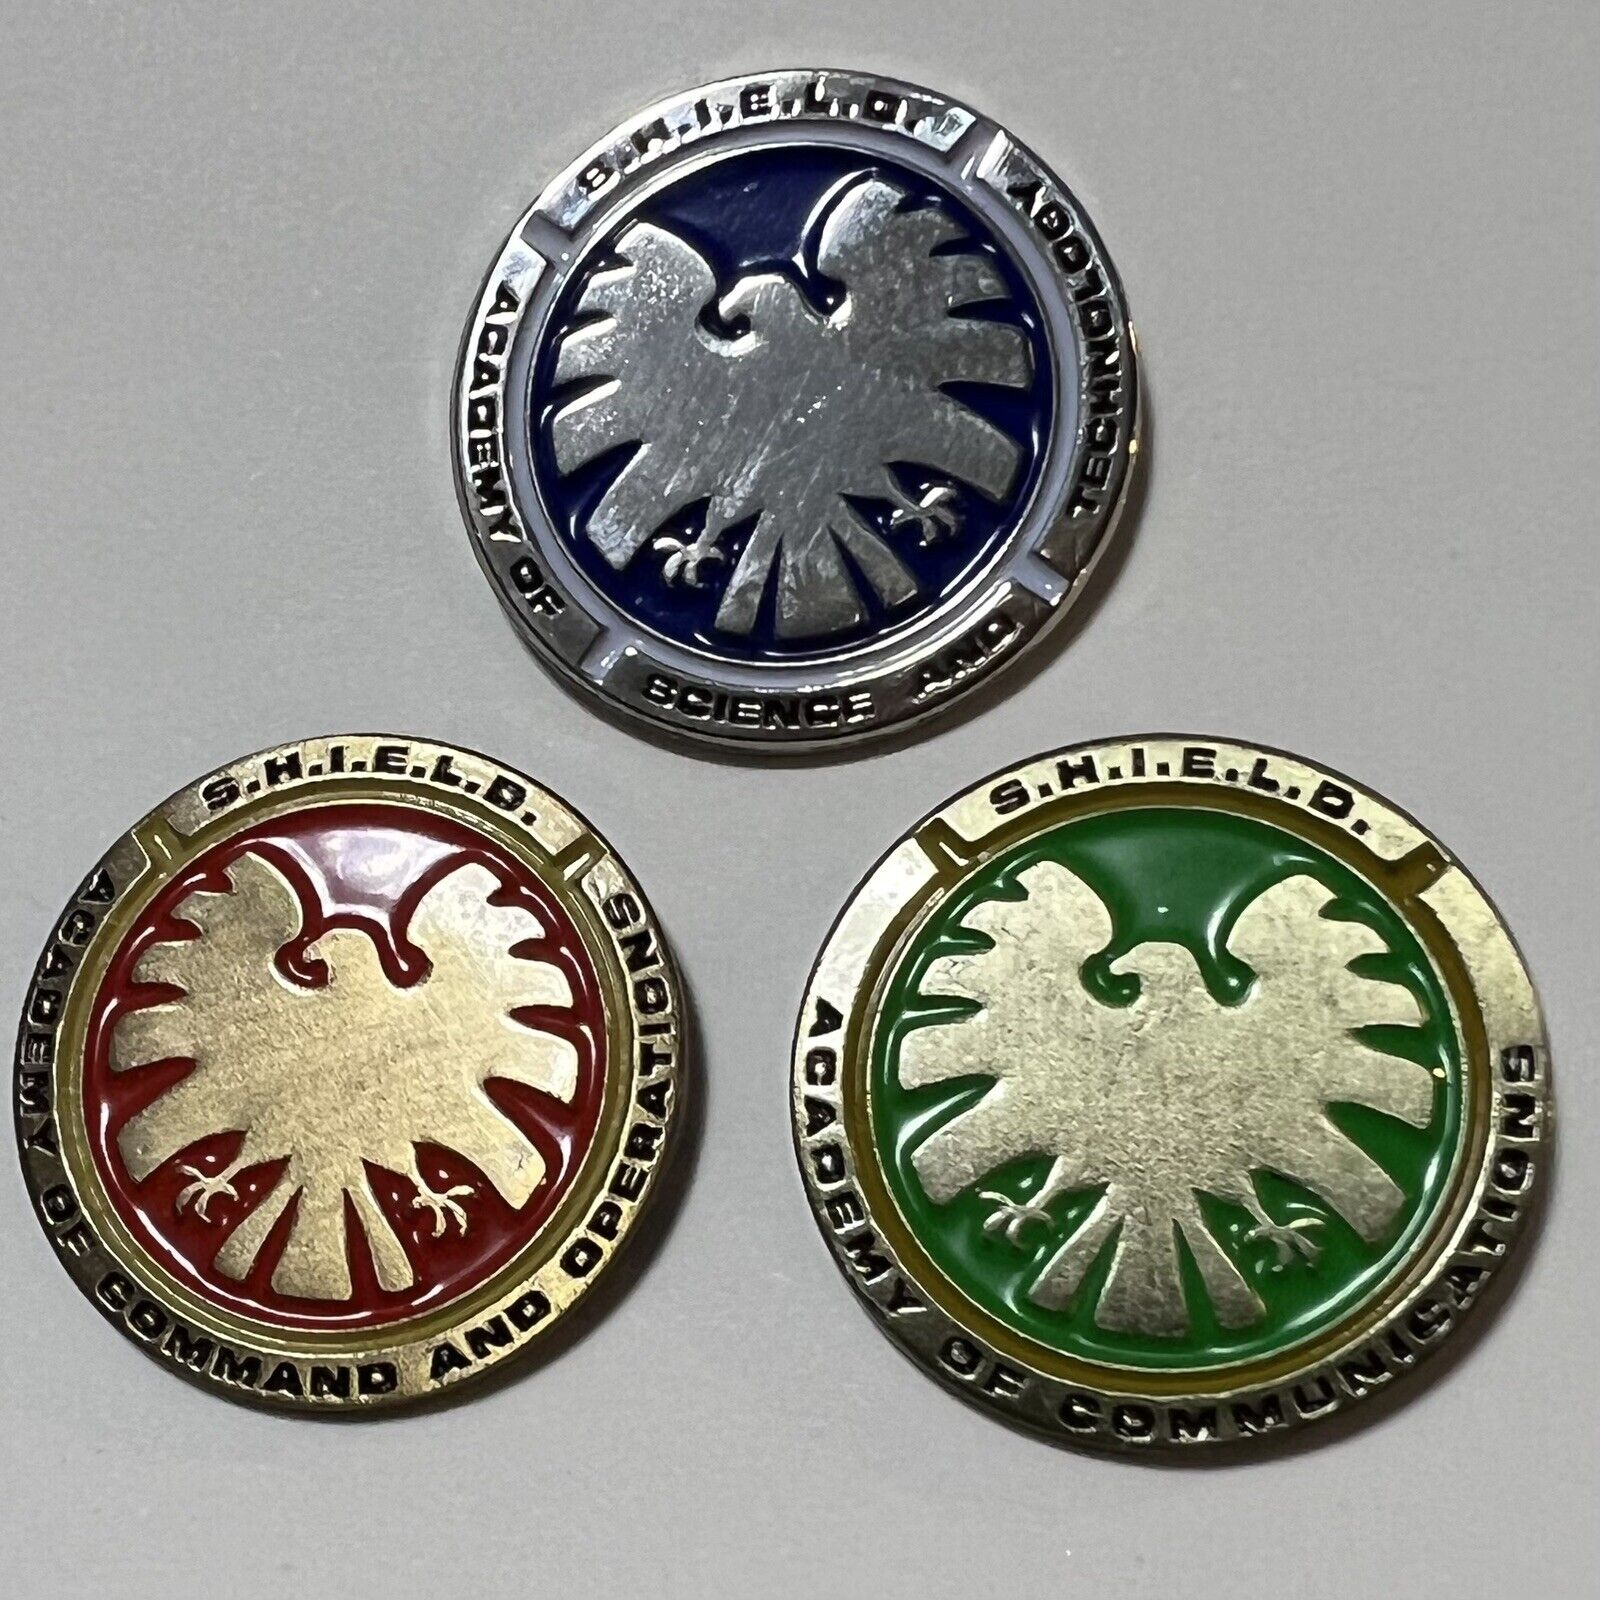 SHIELD ACADEMY OF SCIENCE & TECH / COMMAND / COMMUNICATIONS PIN SET COSPLAY PROP